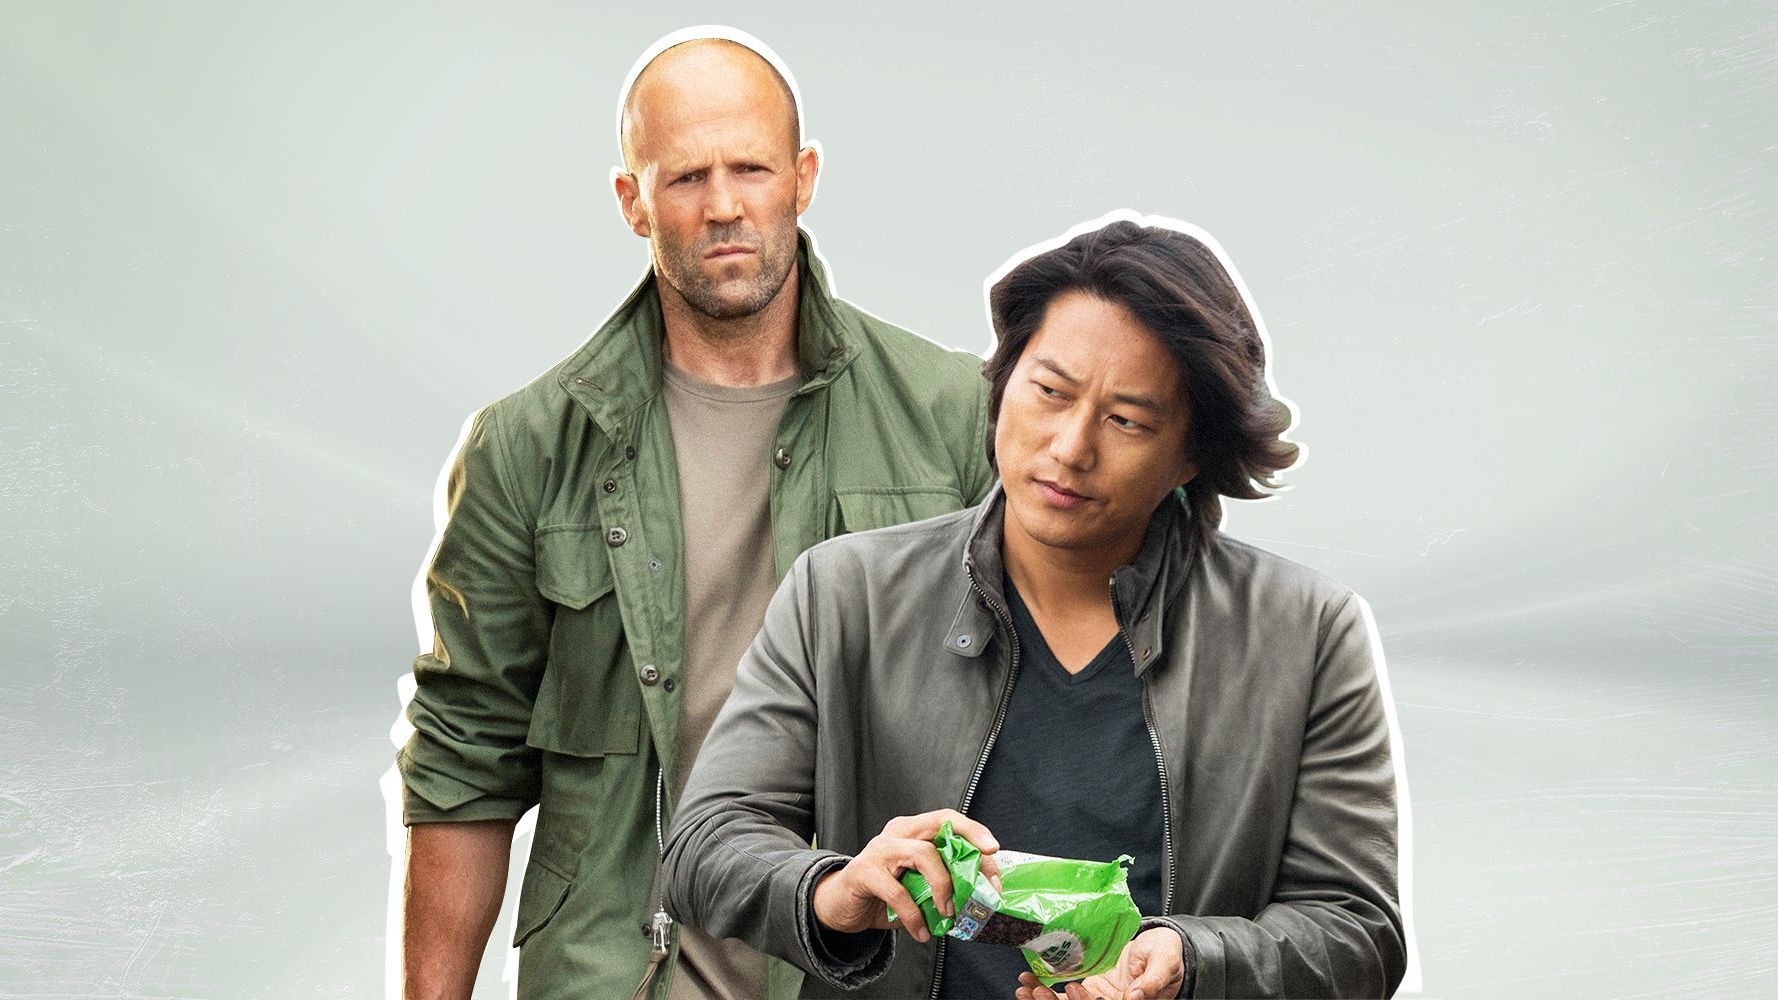 Fate of the Furious: Shaw-Han controversy discussed